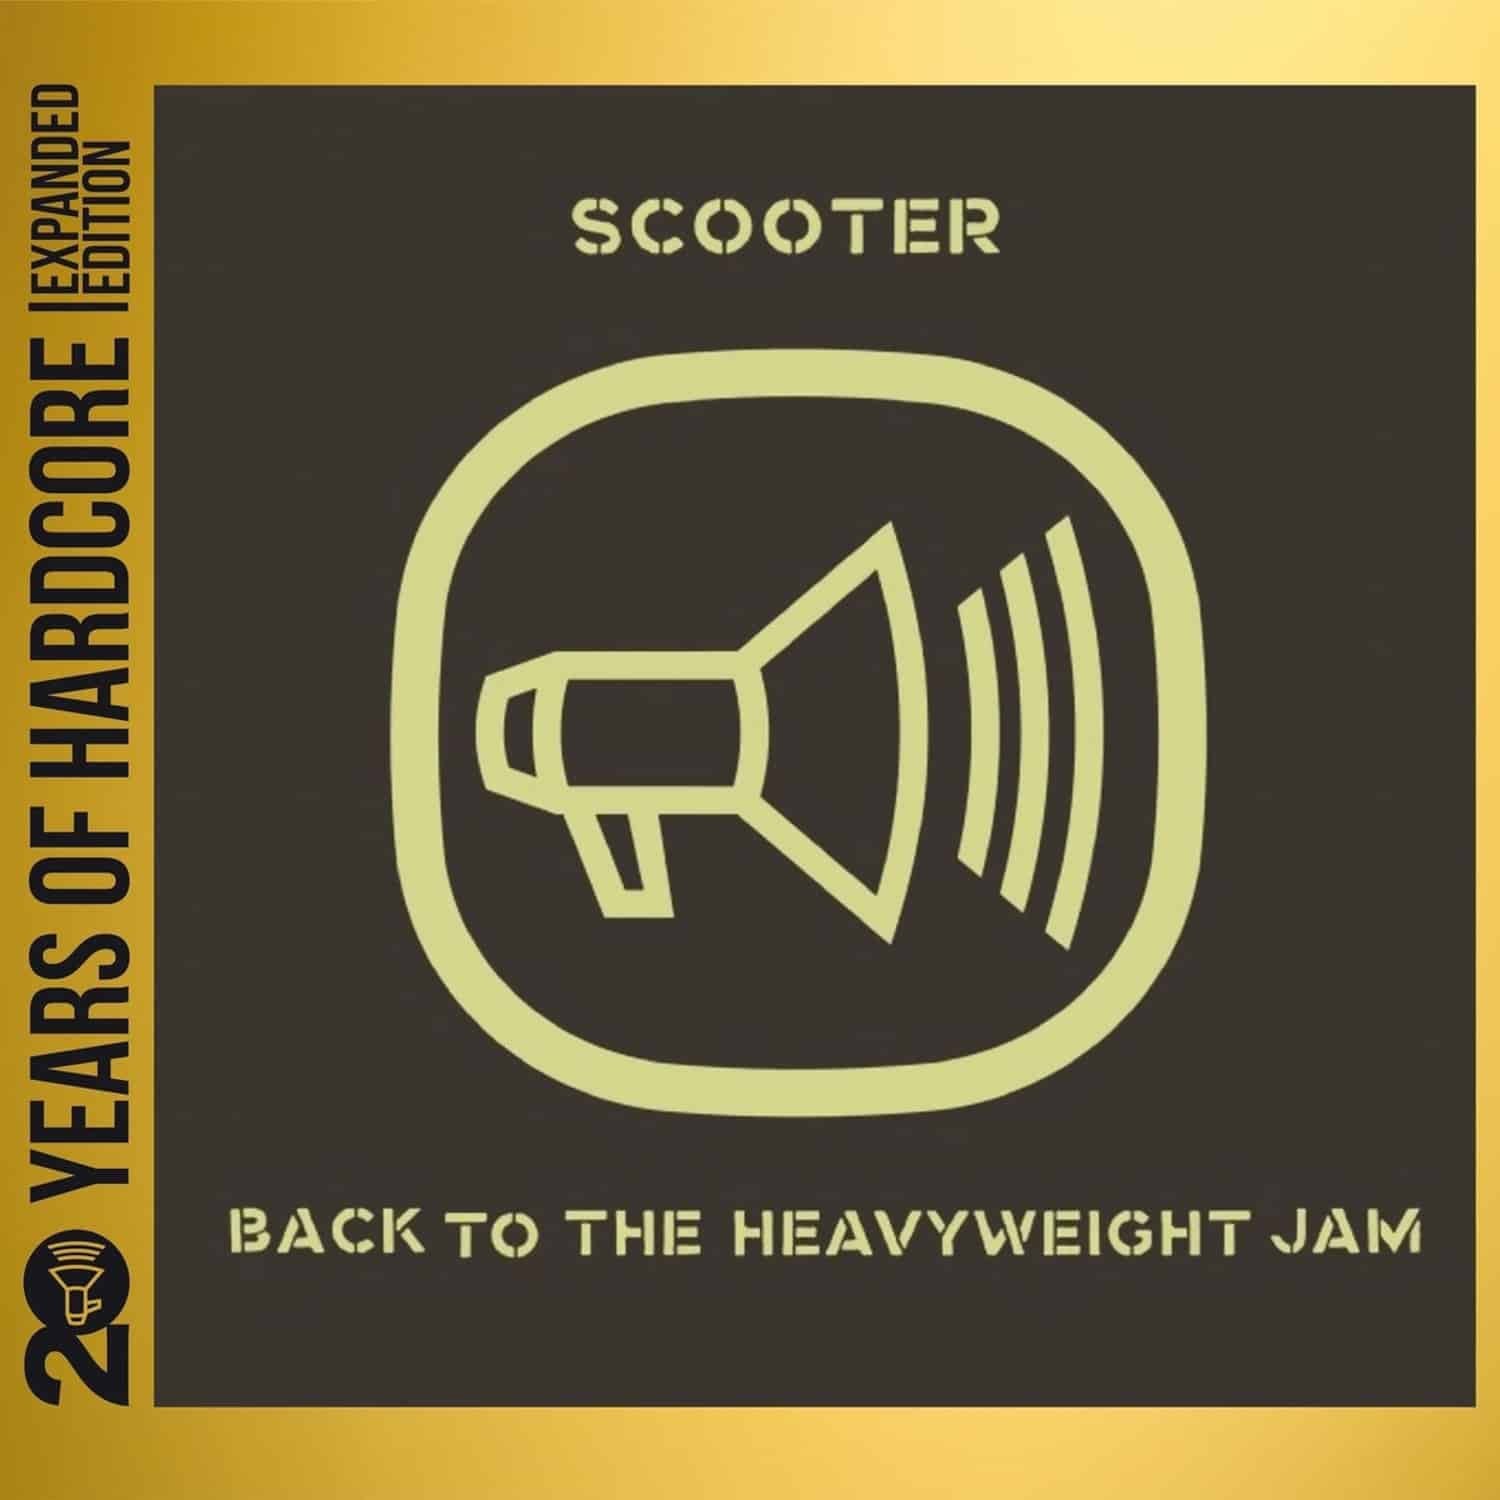 Scooter - BACK TO THE HEAVYWEIGHT JAM 